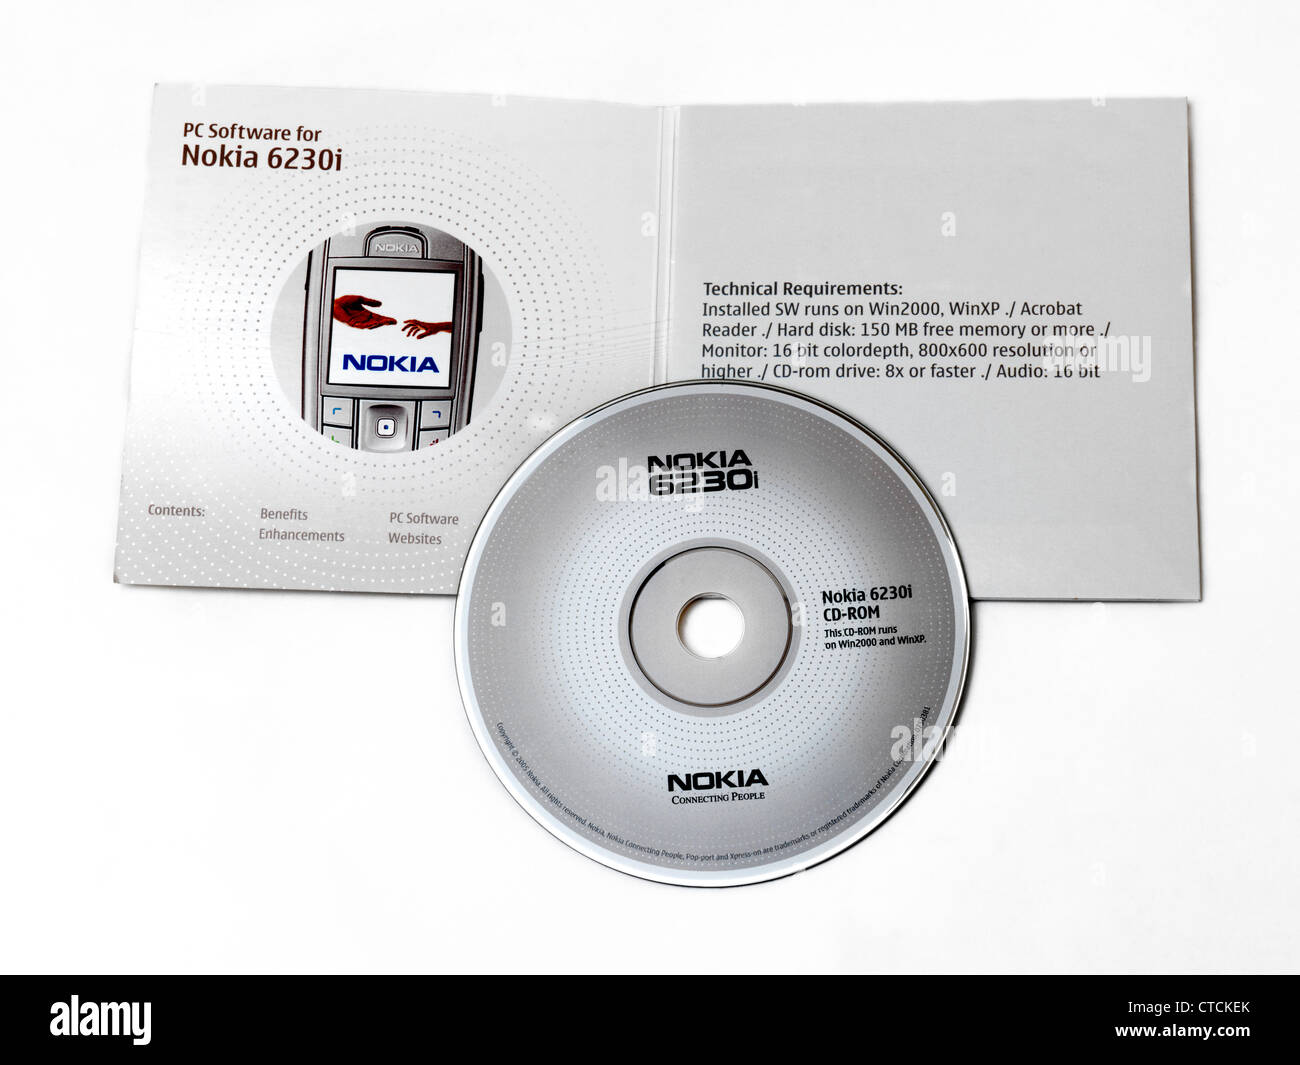 Cd Rom With Pc Software For A Nokia 6230i Mobile Phone Stock